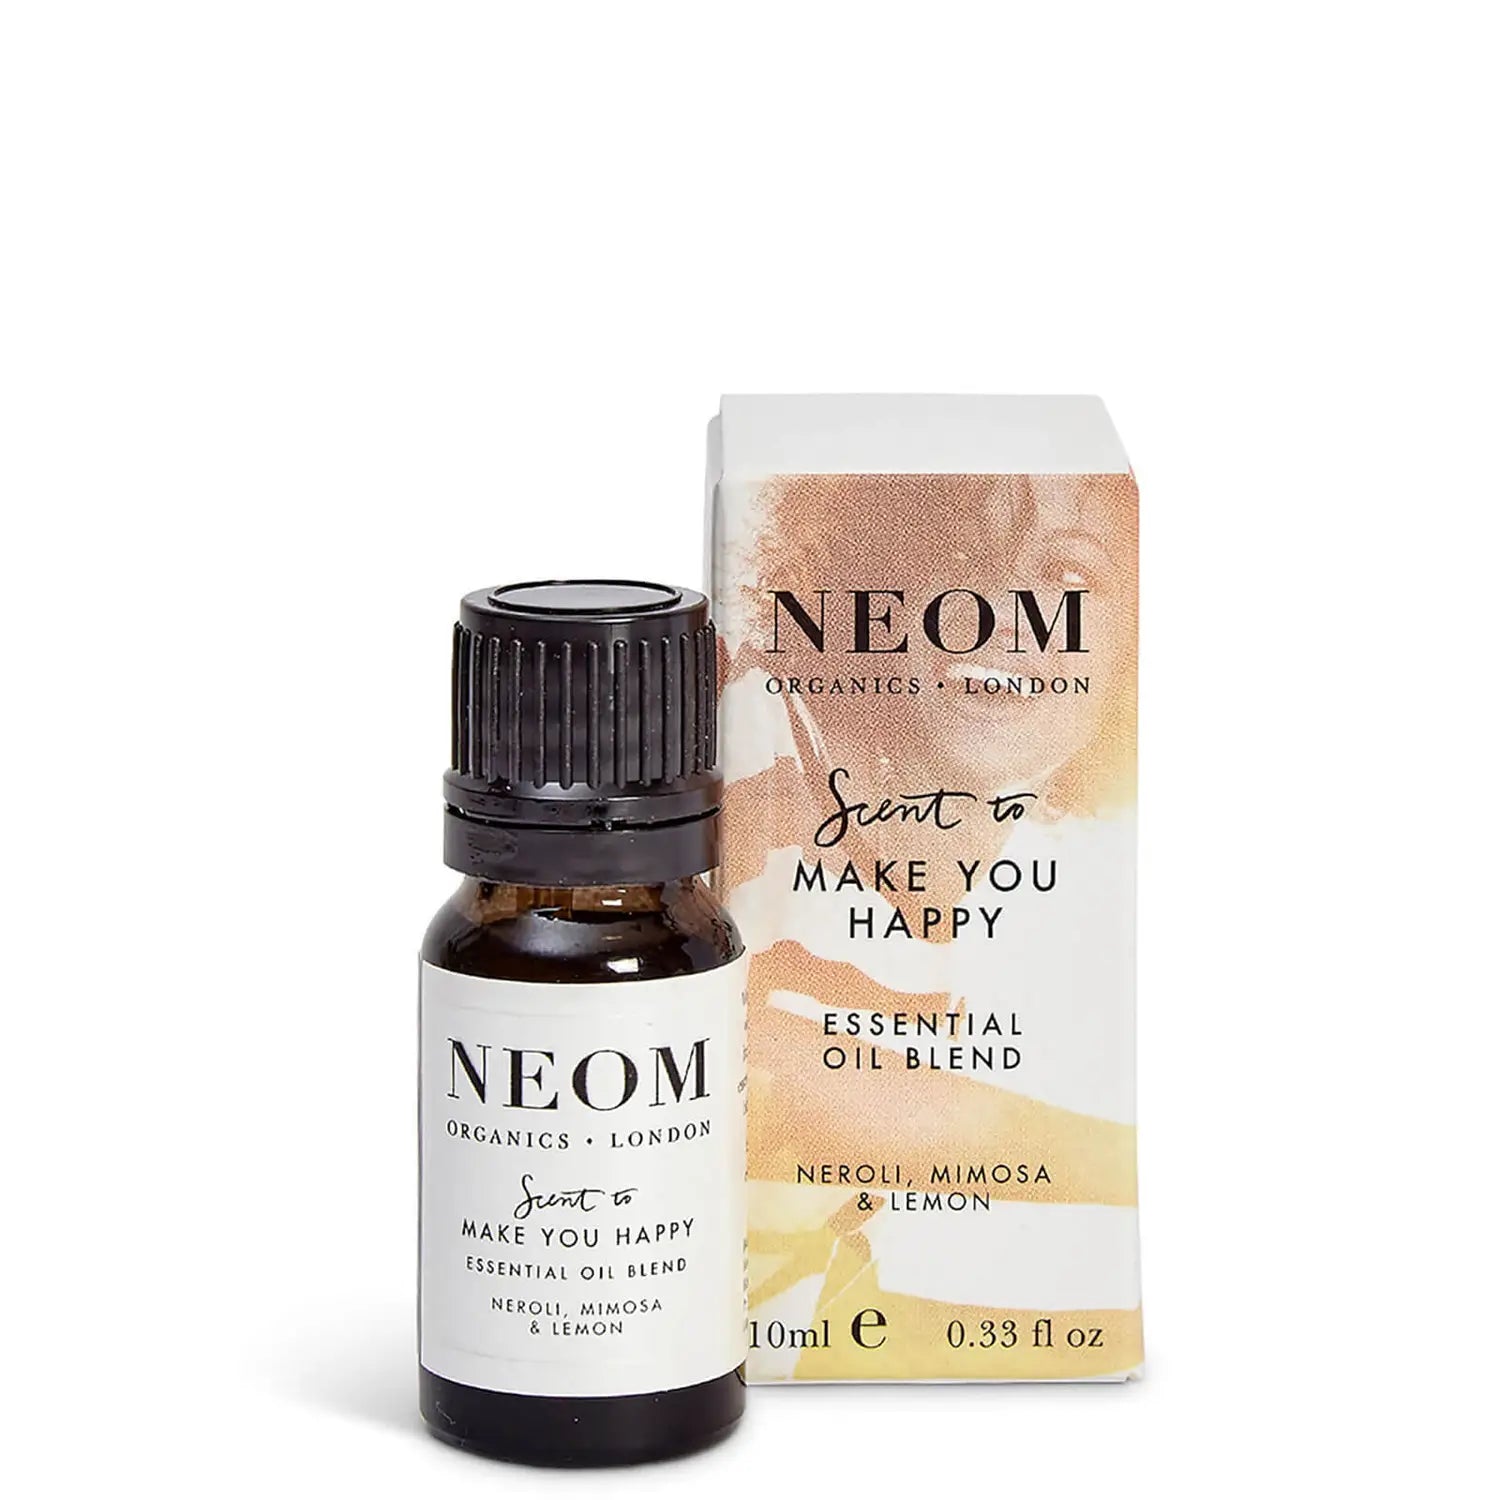 Neom Organics London Scent to Make You Happy Essential Oil Blend 10ML